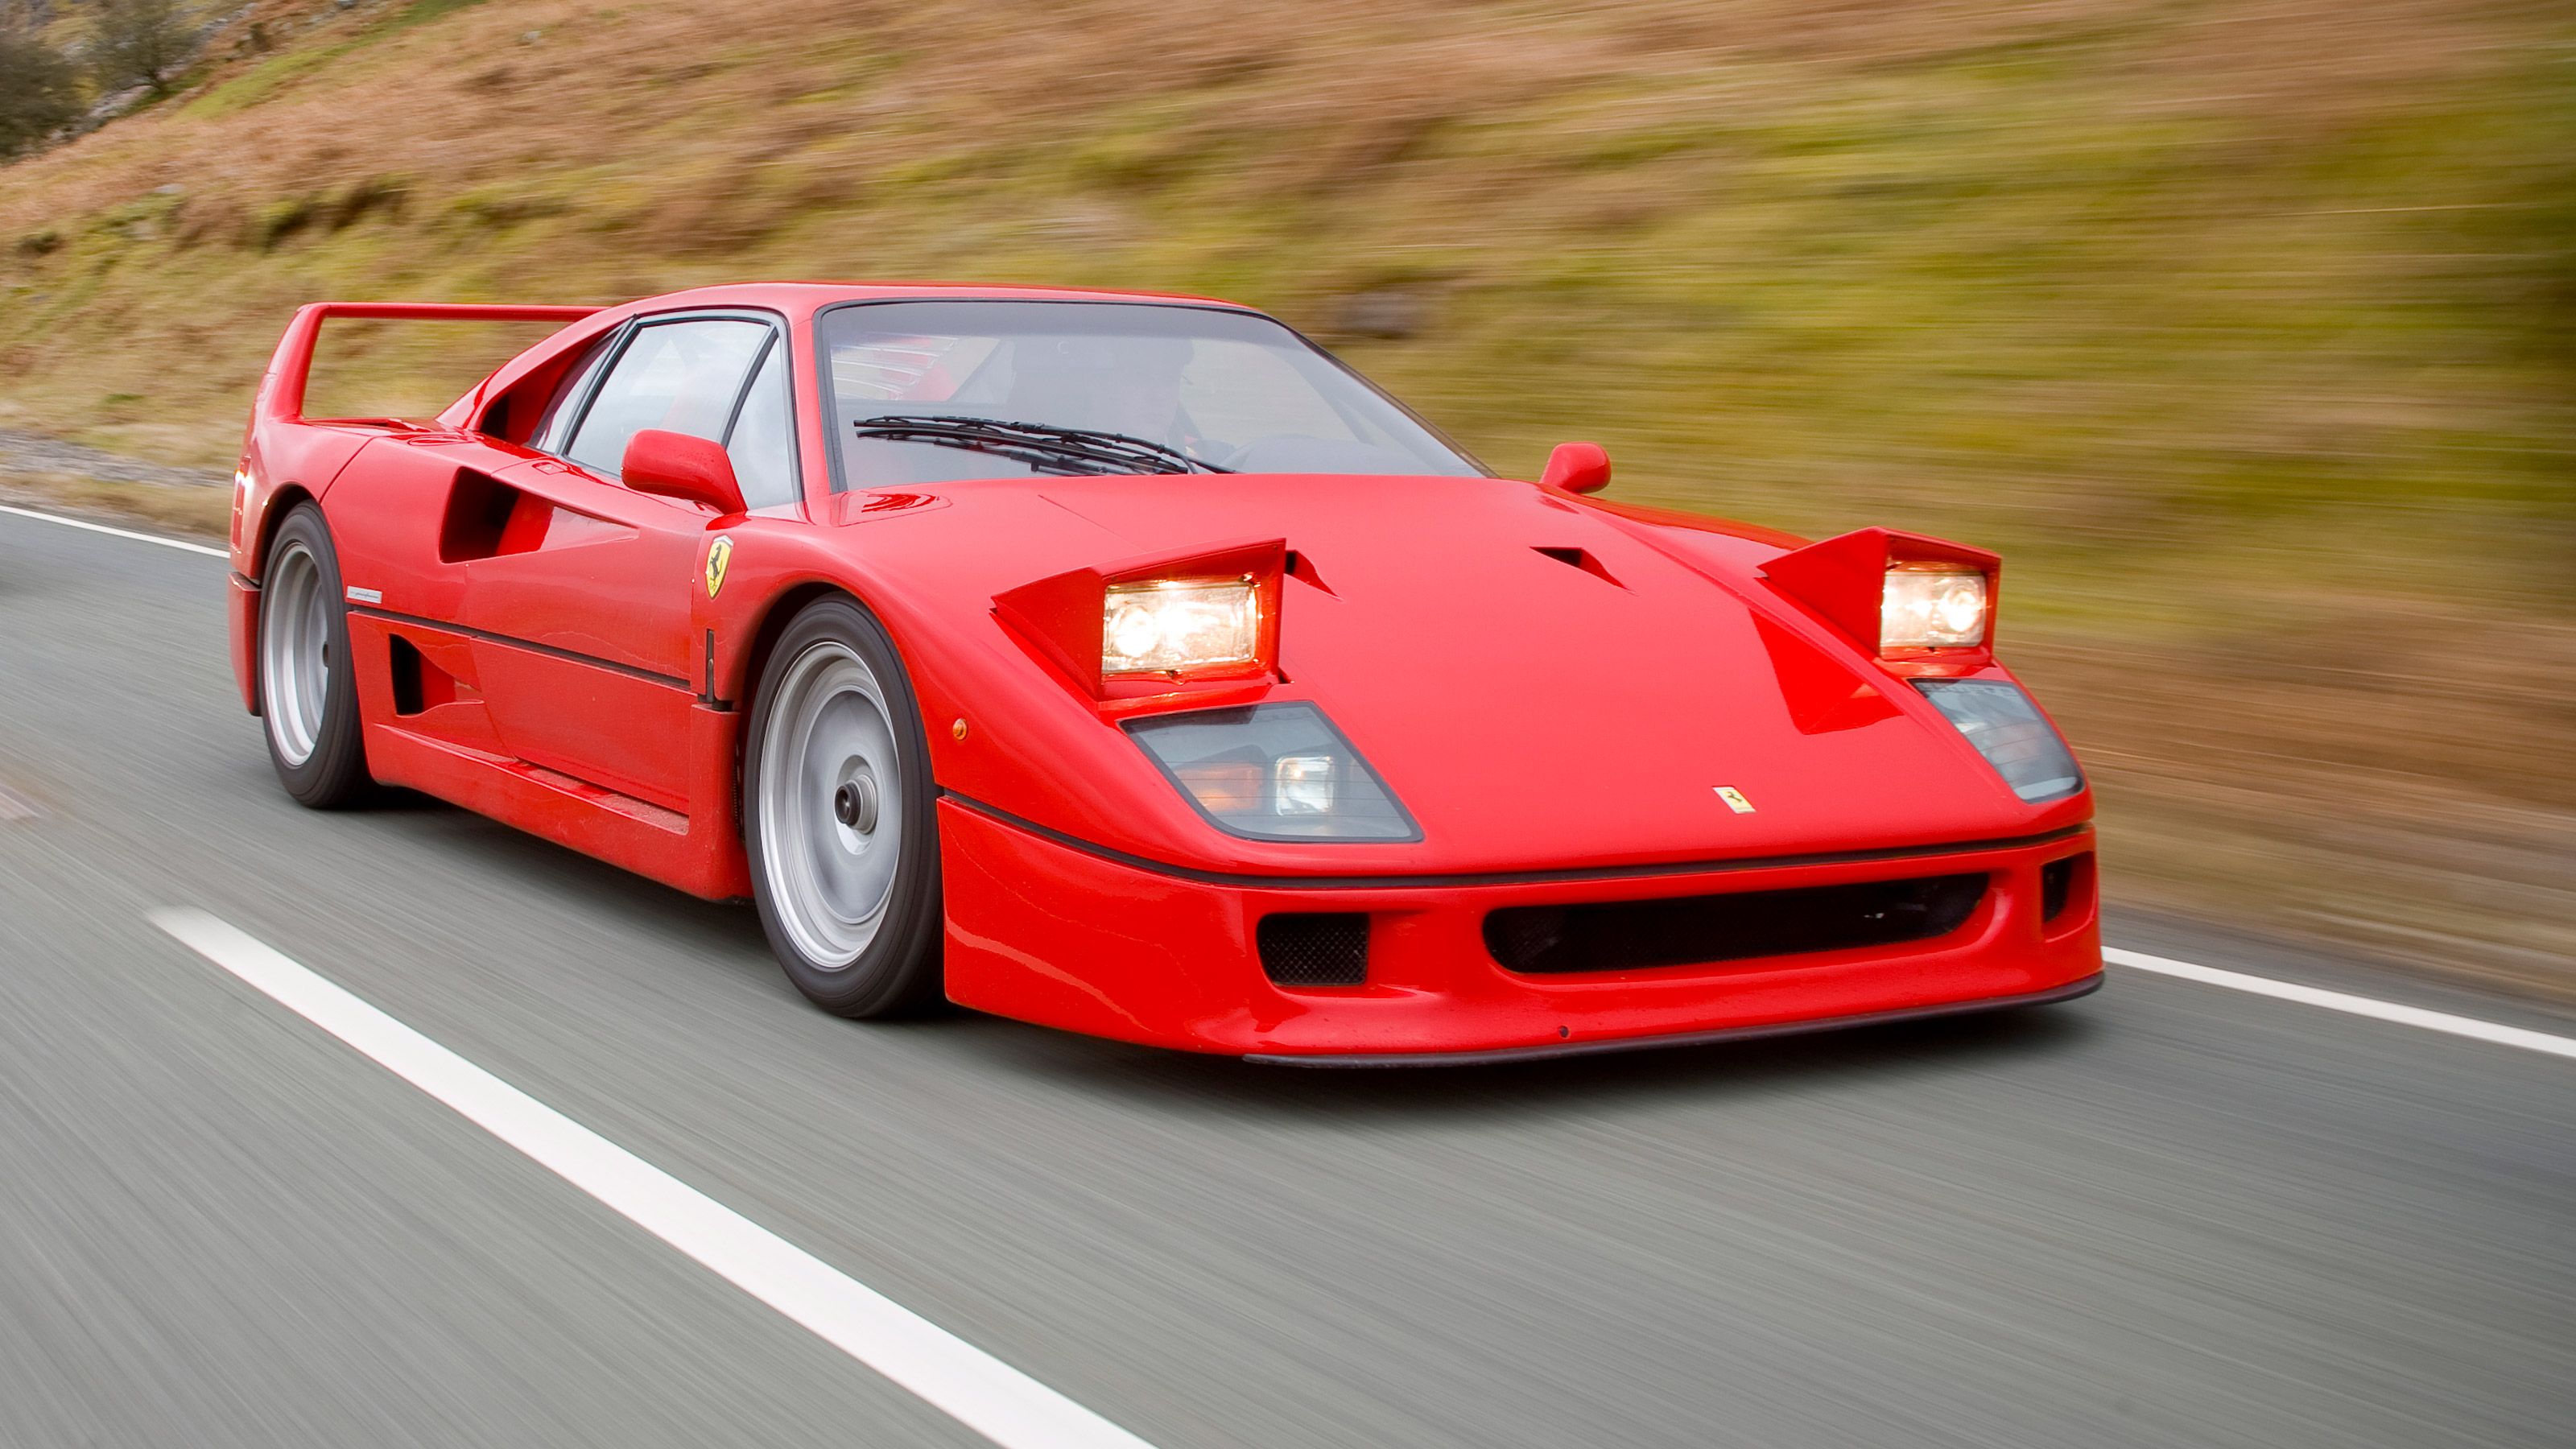 Ferrari F40 Front View With Popup Headlights On Show